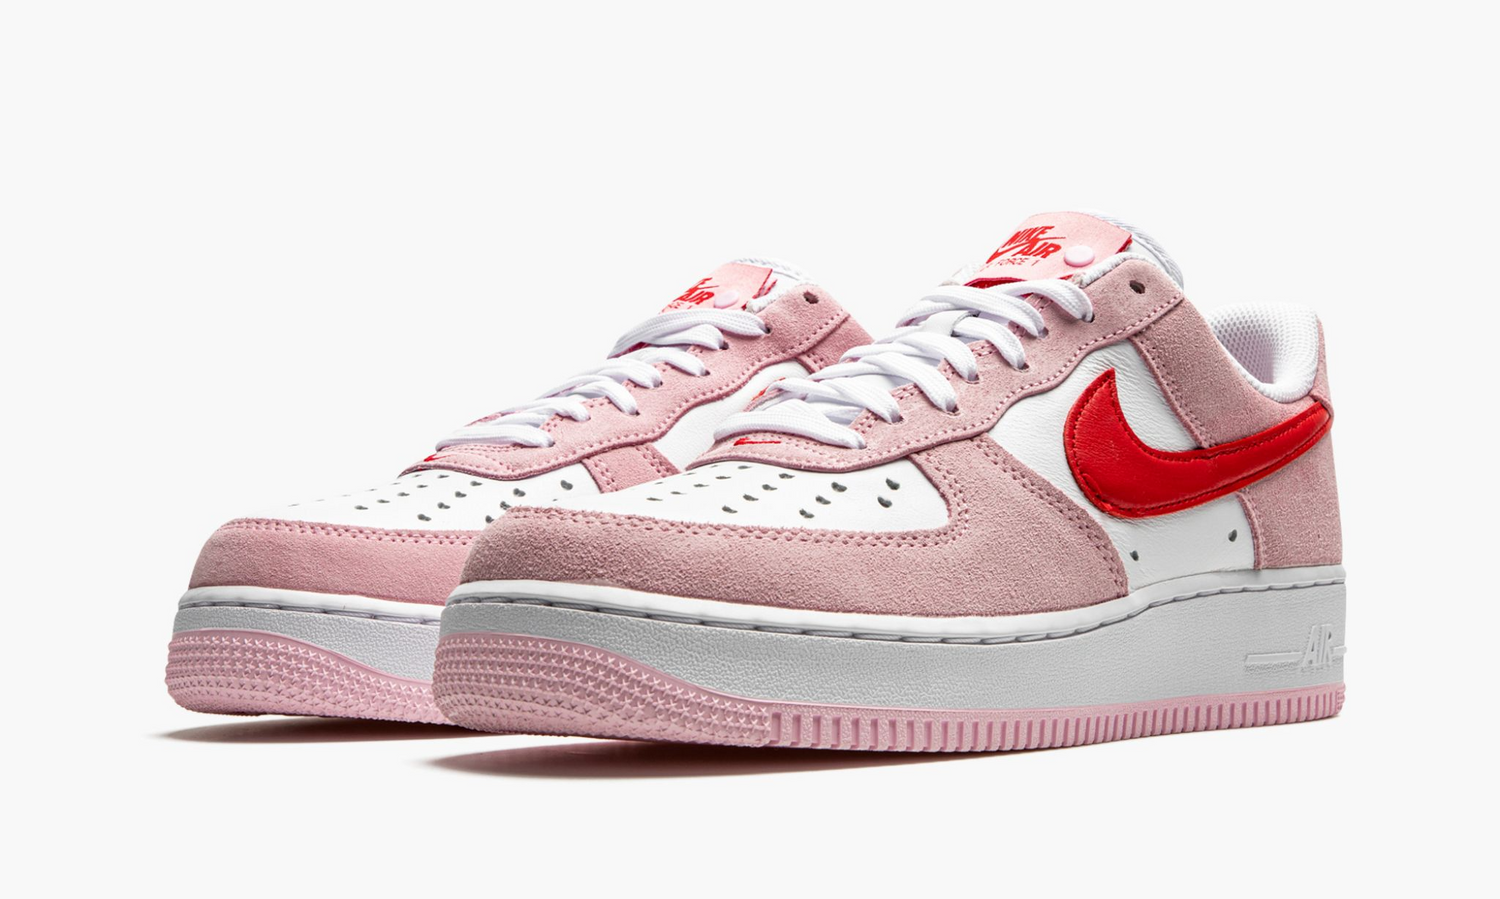 Air force valentines day. Nike Air Force Valentines Day 2021. Nike Air Force 1 Low Valentines Day 2021. Nike Air Force 1 Low Valentines Day. Nike Air Force 1 Low Valentine.